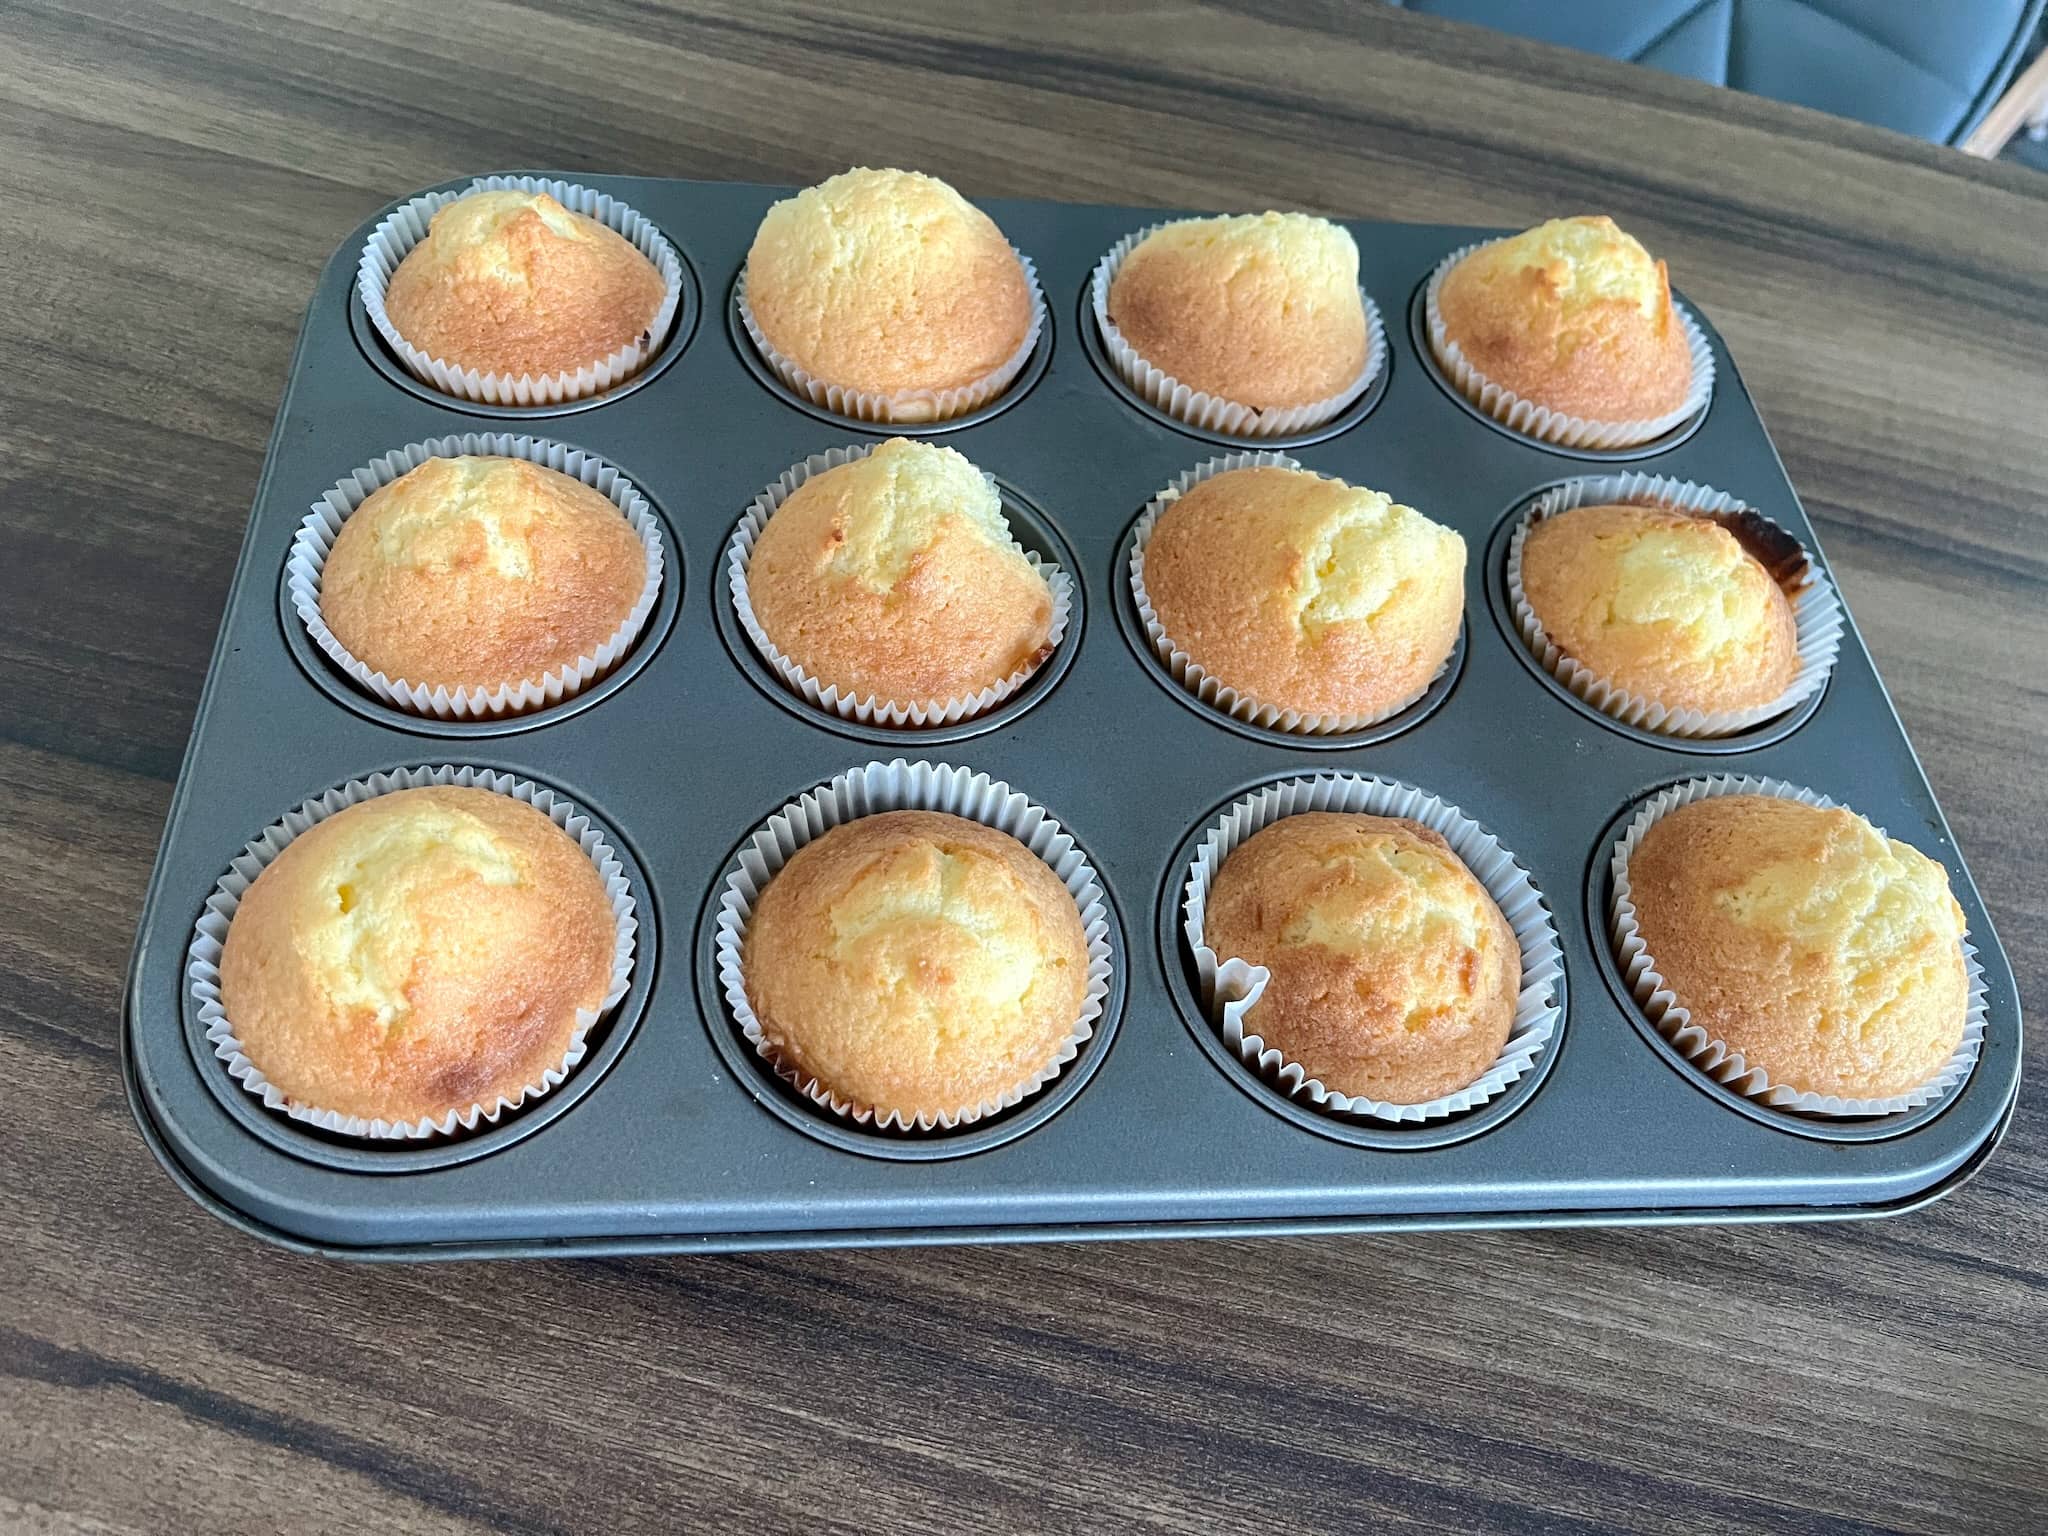 Lemon muffins took out of the oven